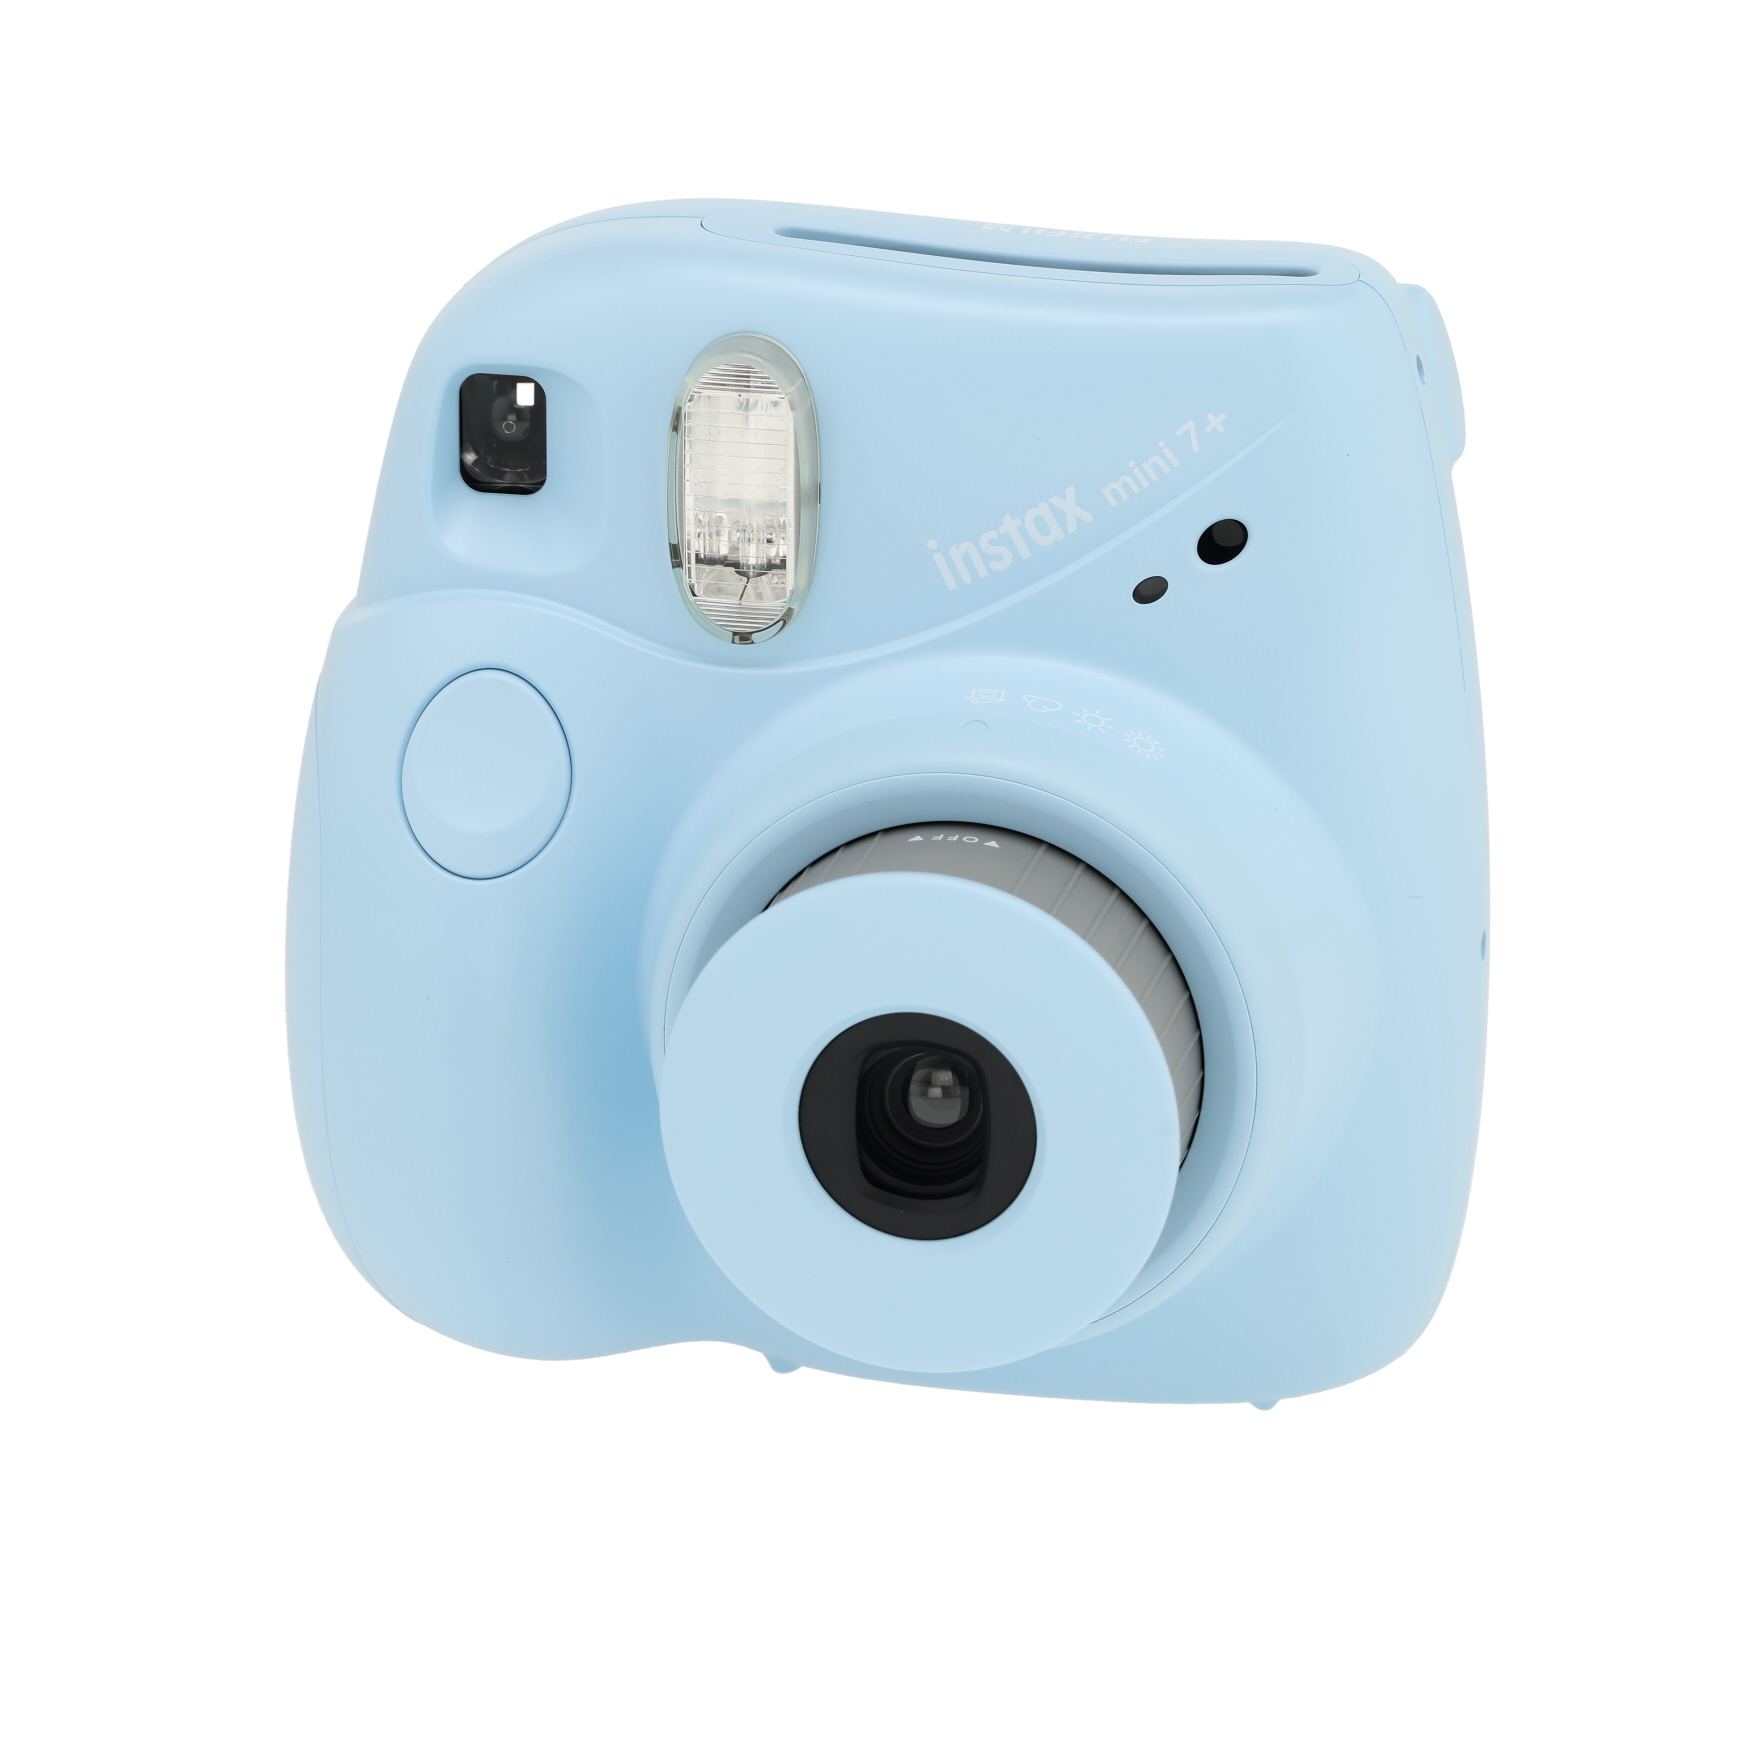 Fujifilm Instax Mini 7+ Camera, Easy to Operate, Portable, Handy Selfie  Mirror, Polaroid Camera, Perfect for Beginners and Experts, Sleek and  Stylish